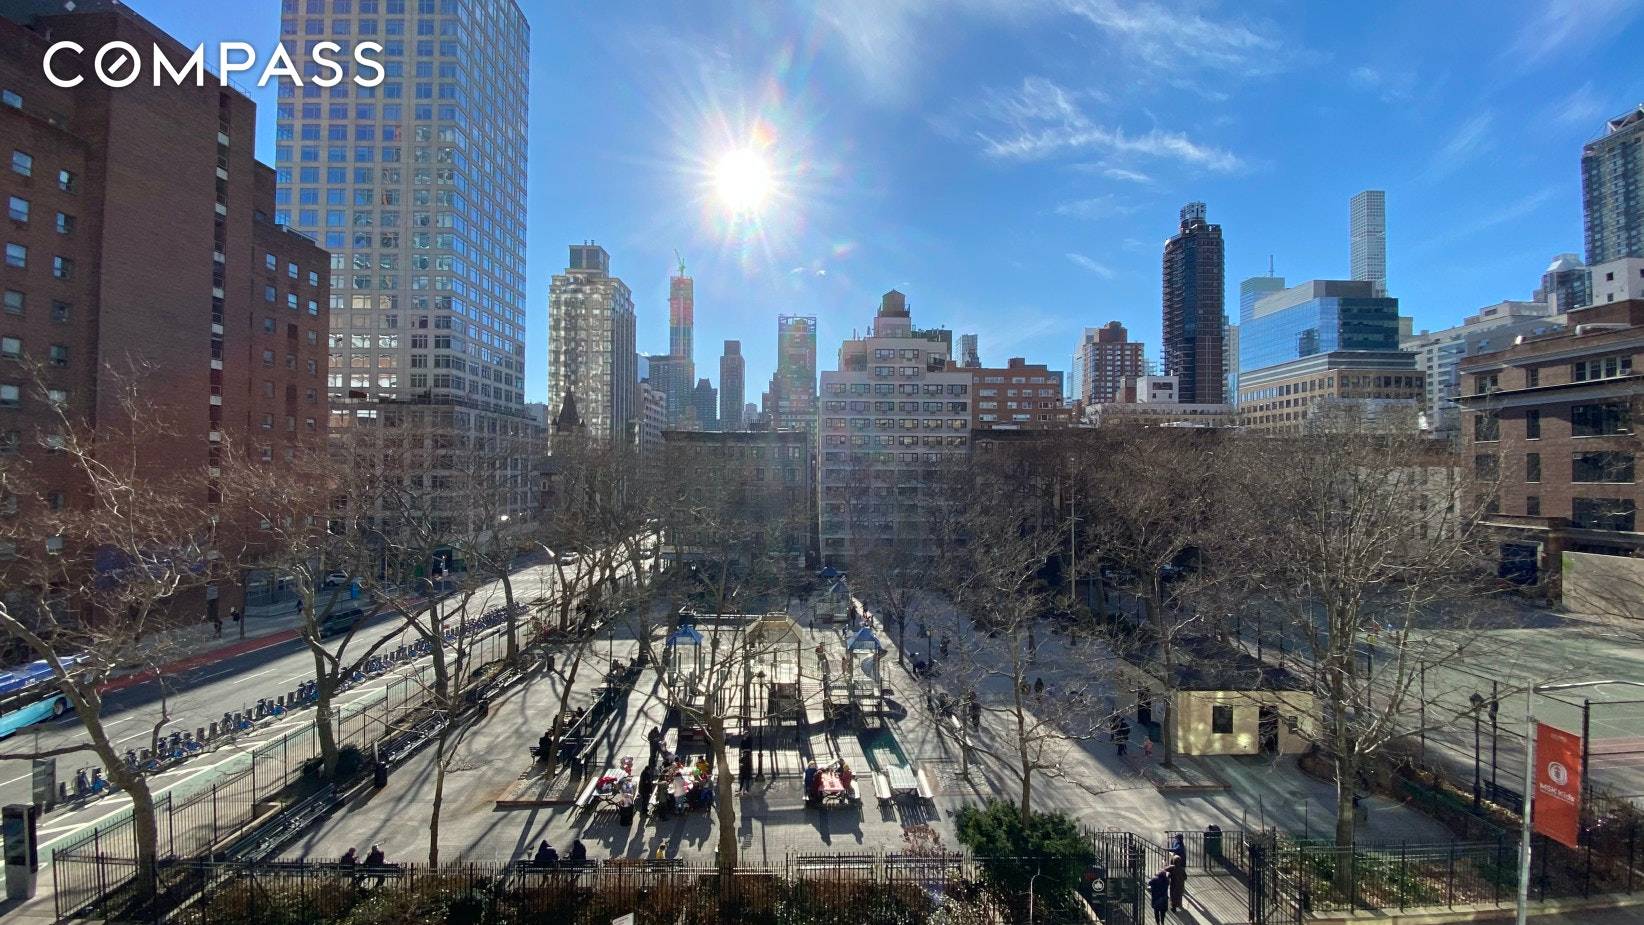 Rarely you would find an apartment in NYC with an open unobstructed southern view, overlooking a park.